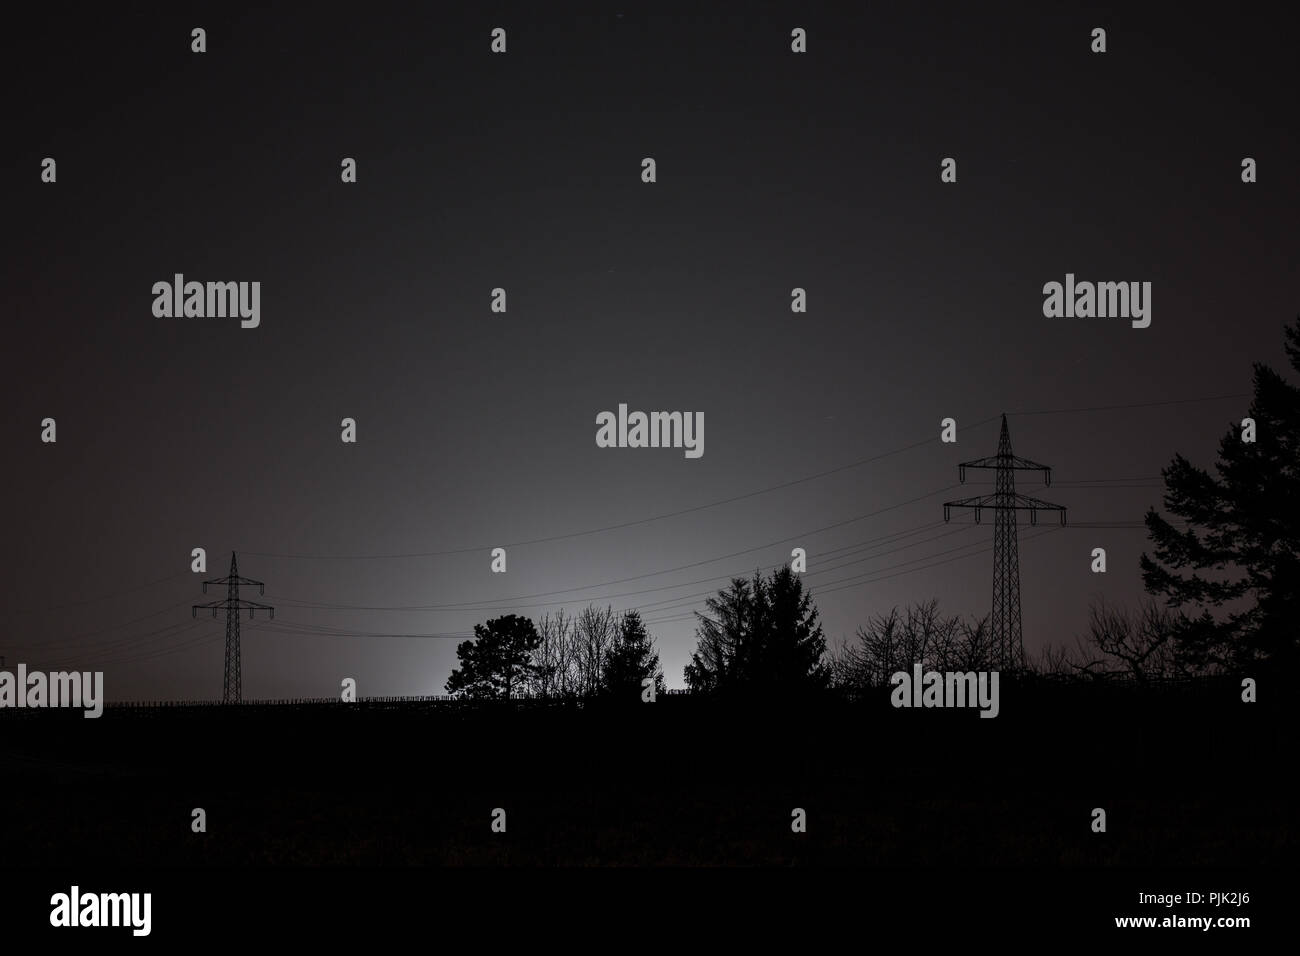 Silhouettes of trees and electricity pylons in a bright glow, contours, dark, black and white Stock Photo